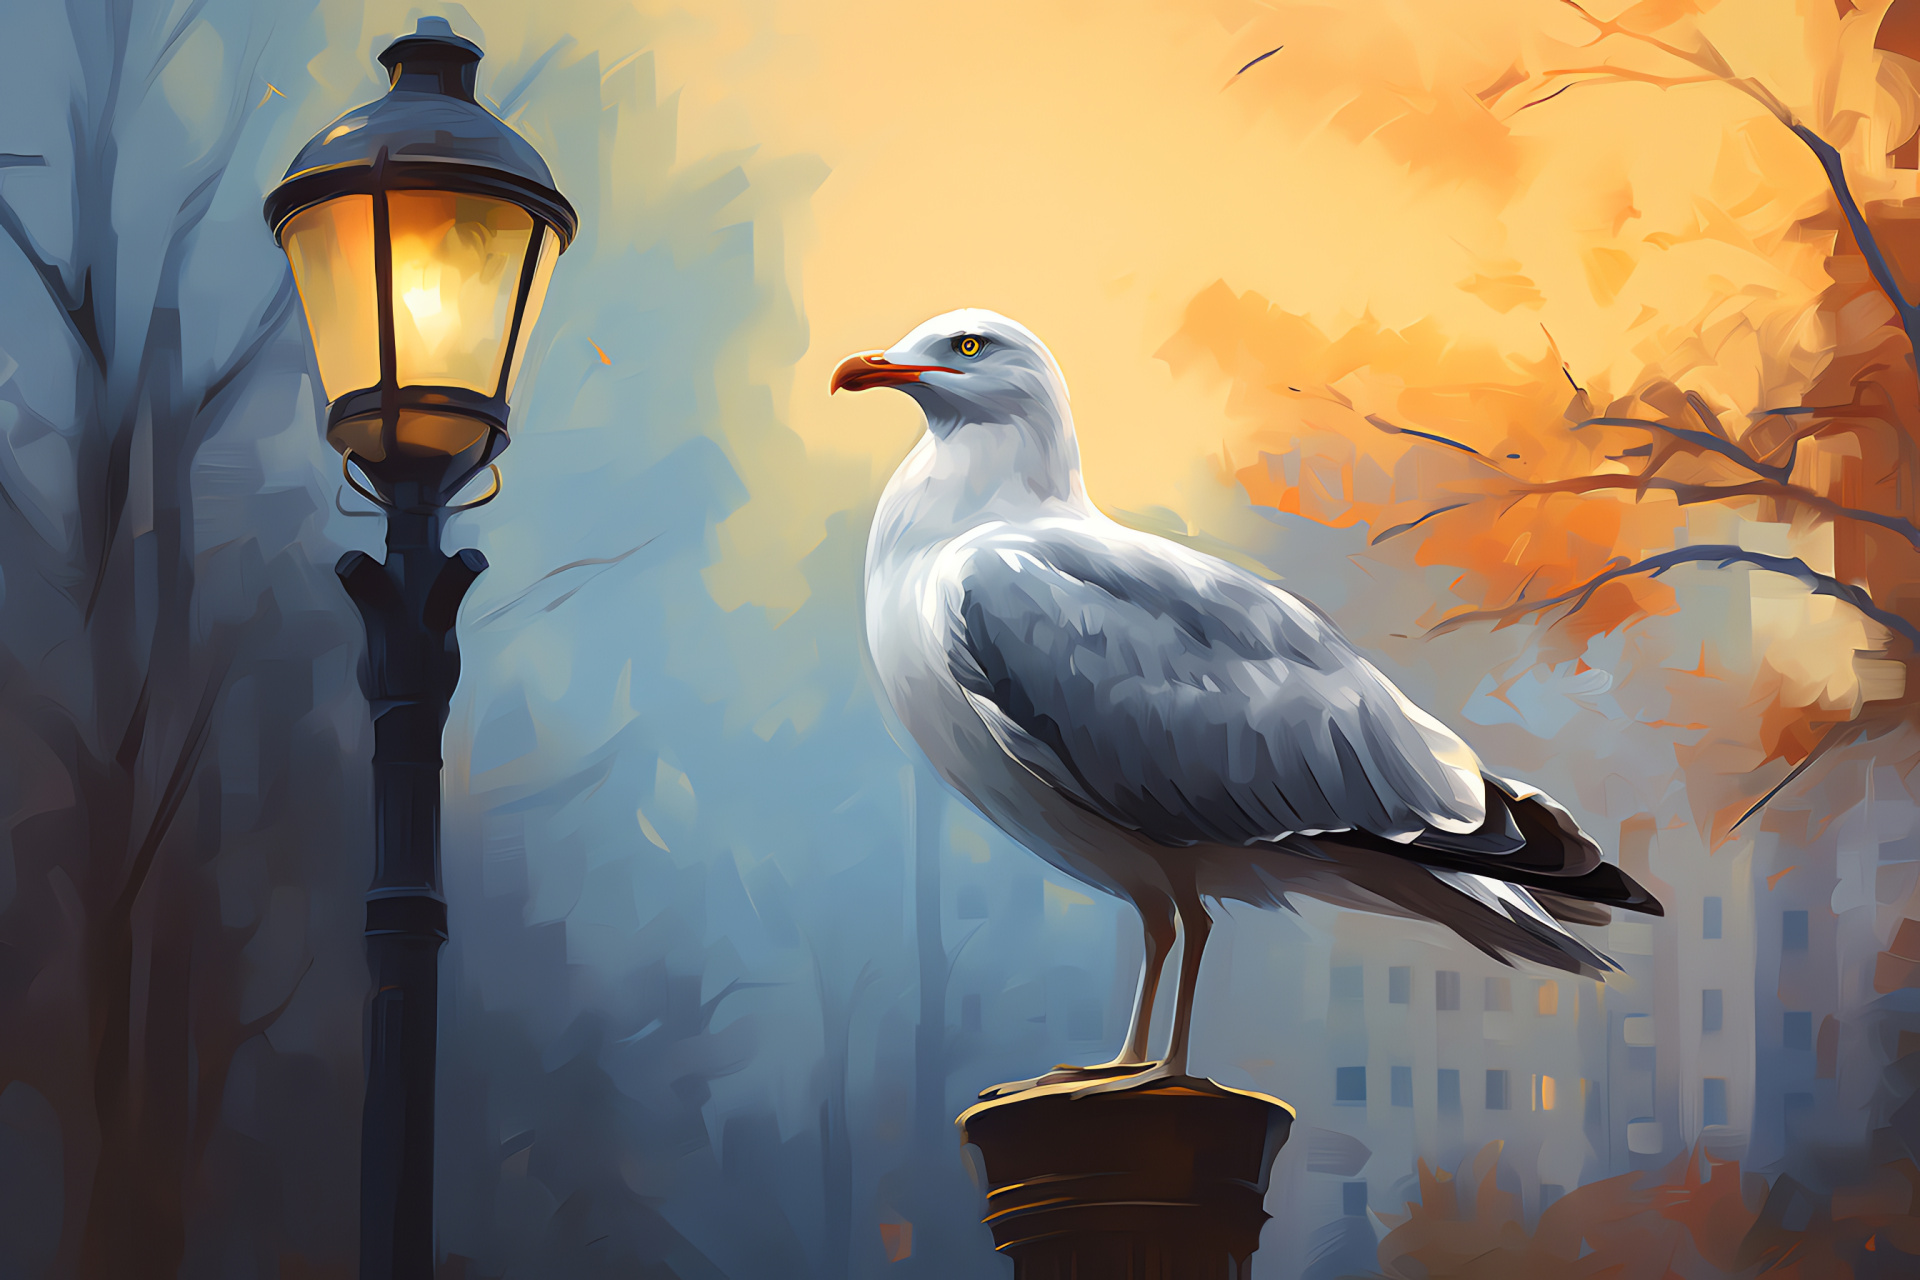 Seagull flight, urban wildlife, bird perched high, feathered creature, cityscape background, HD Desktop Image